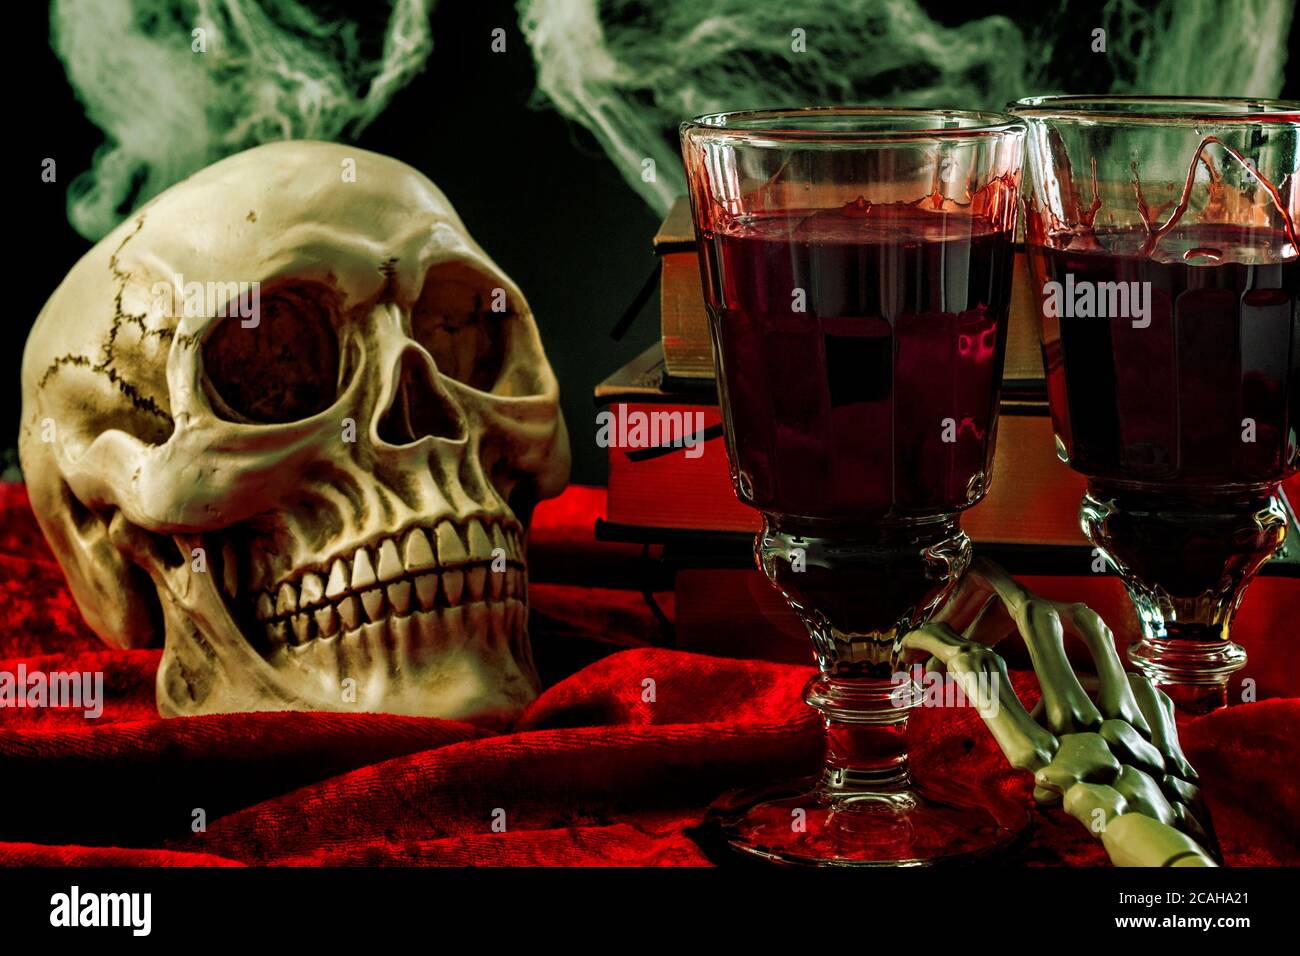 https://c8.alamy.com/comp/2CAHA21/halloween-backdrop-haunted-house-and-vampire-drink-conceptual-idea-with-skull-glass-filled-with-blood-spiderwebs-vintage-books-and-skeleton-arm-on-2CAHA21.jpg